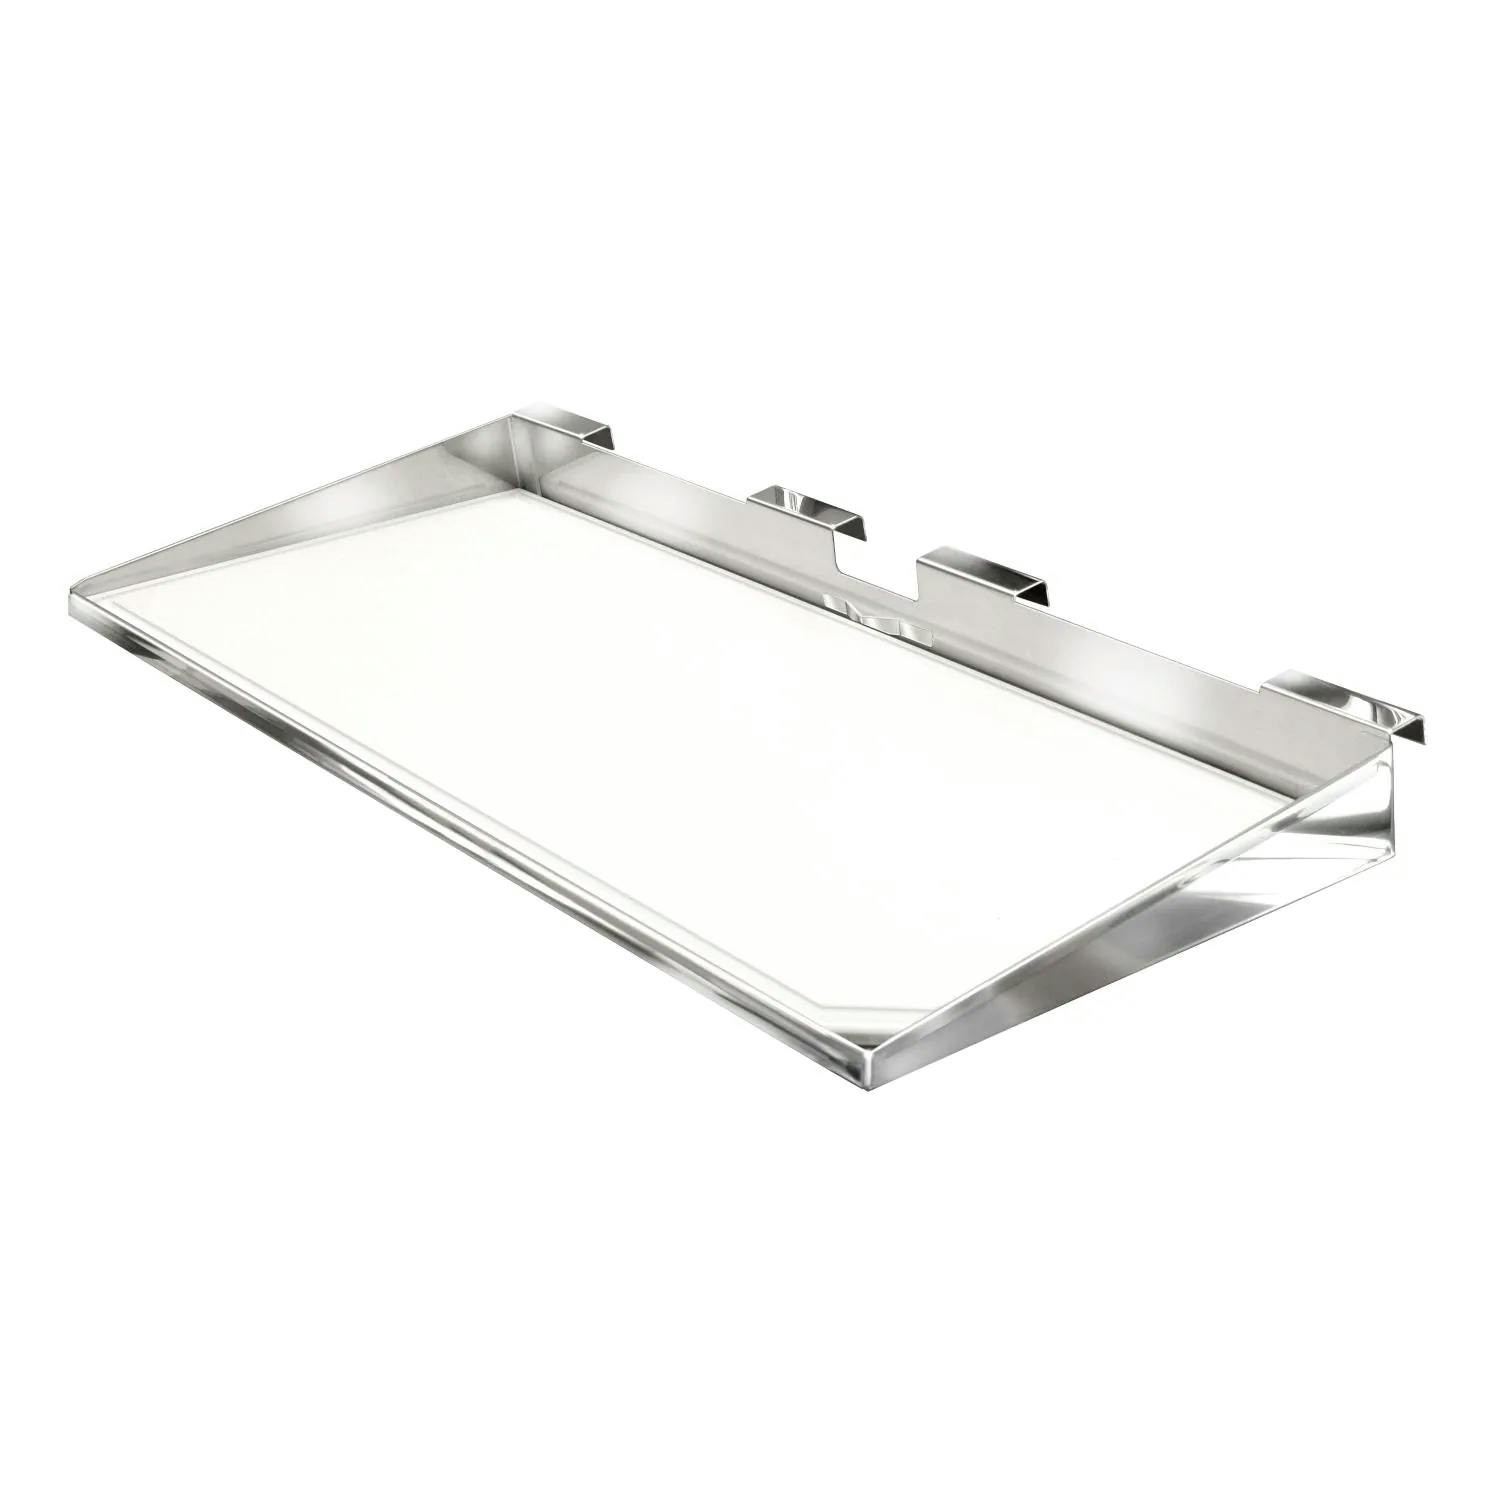 Magma Serving Shelf with Removable Cutting Board